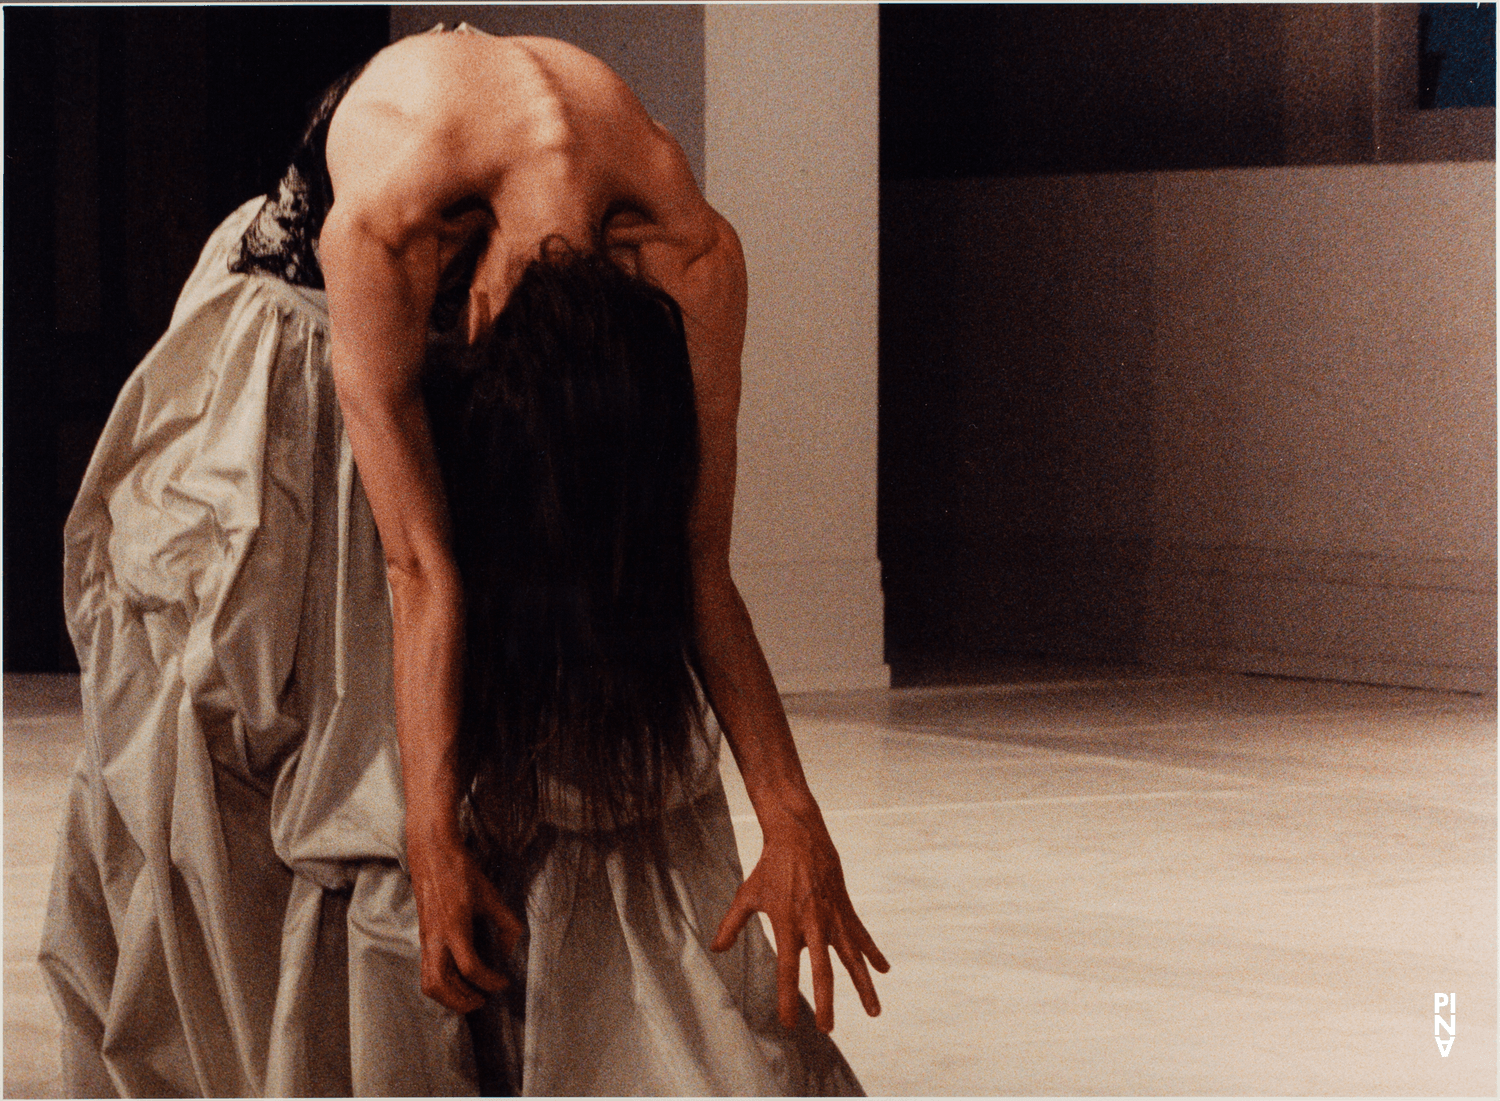 Héléna Pikon in “Two Cigarettes in the Dark” by Pina Bausch